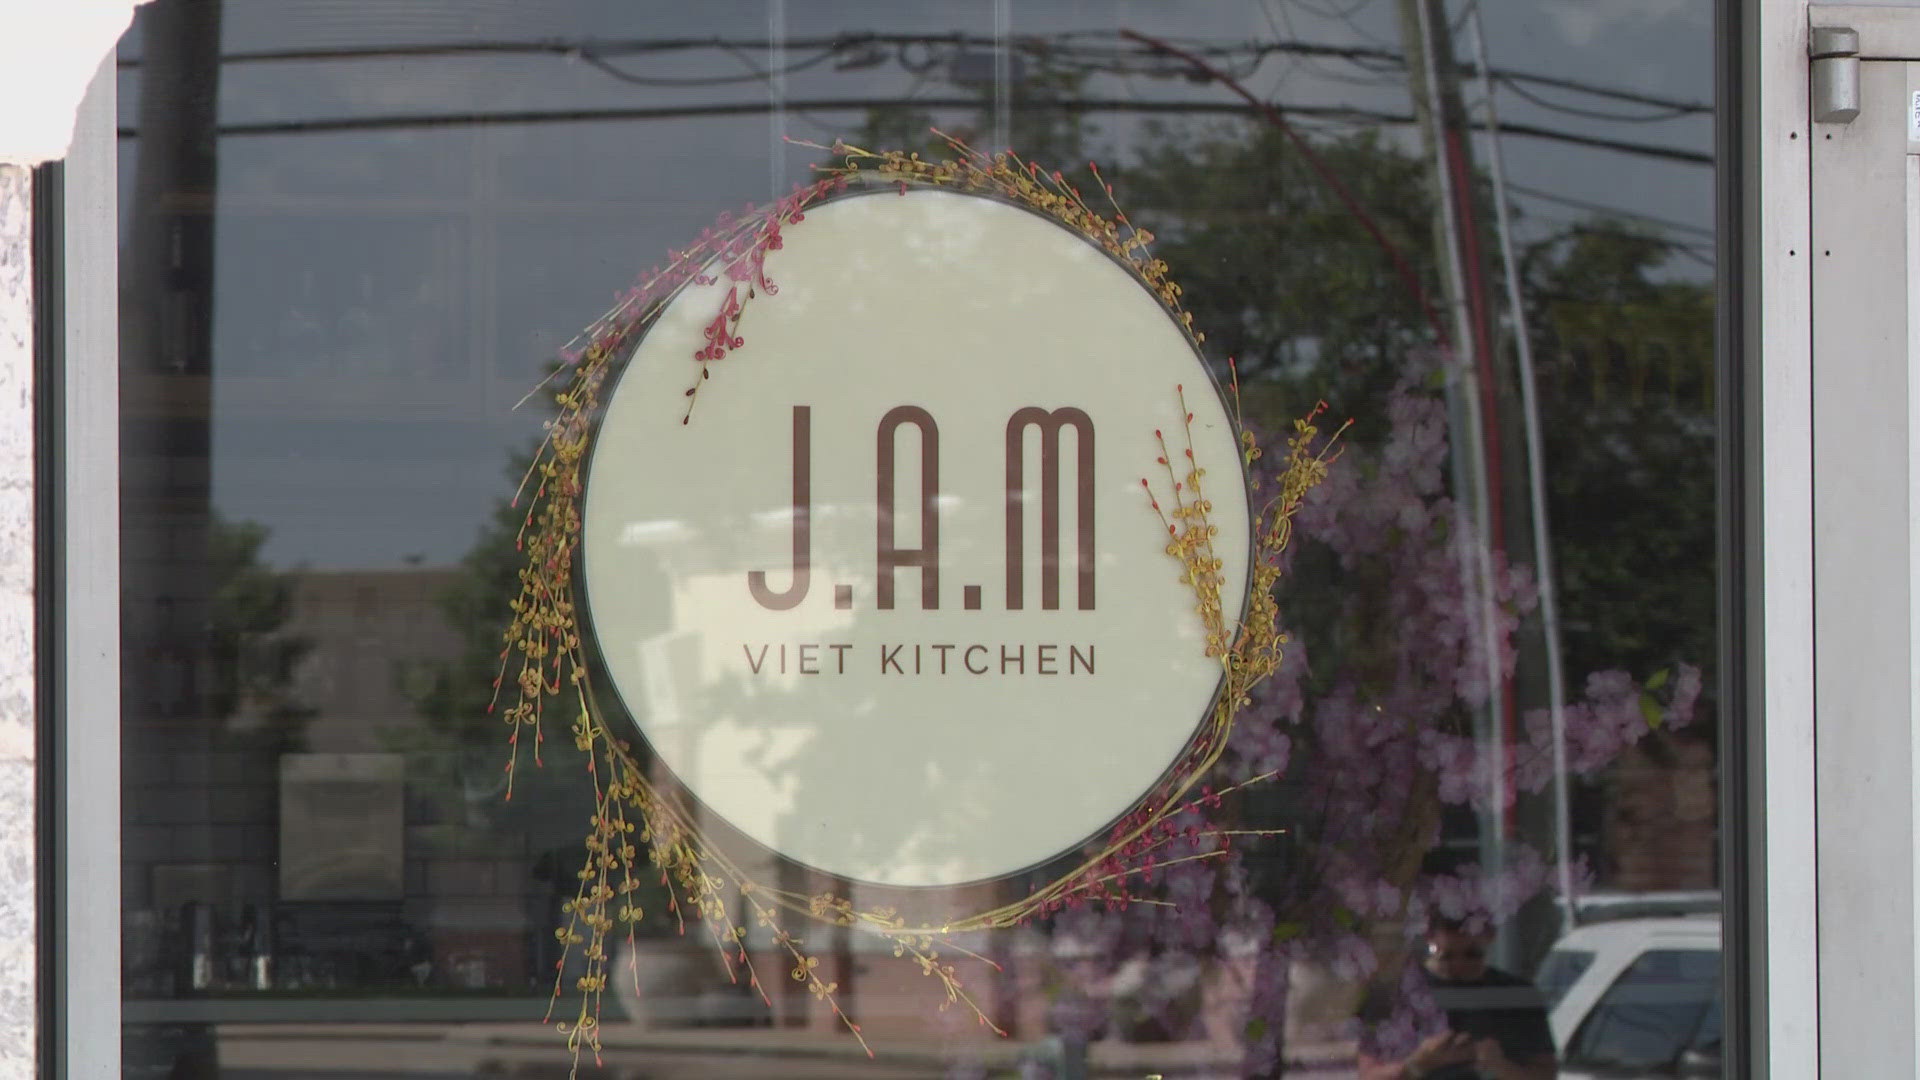 J.A.M. Viet Kitchen on Westheimer lost power the day the hurricane hit. Now, they're losing thousands of dollars a week while waiting for CenterPoint to restore it.